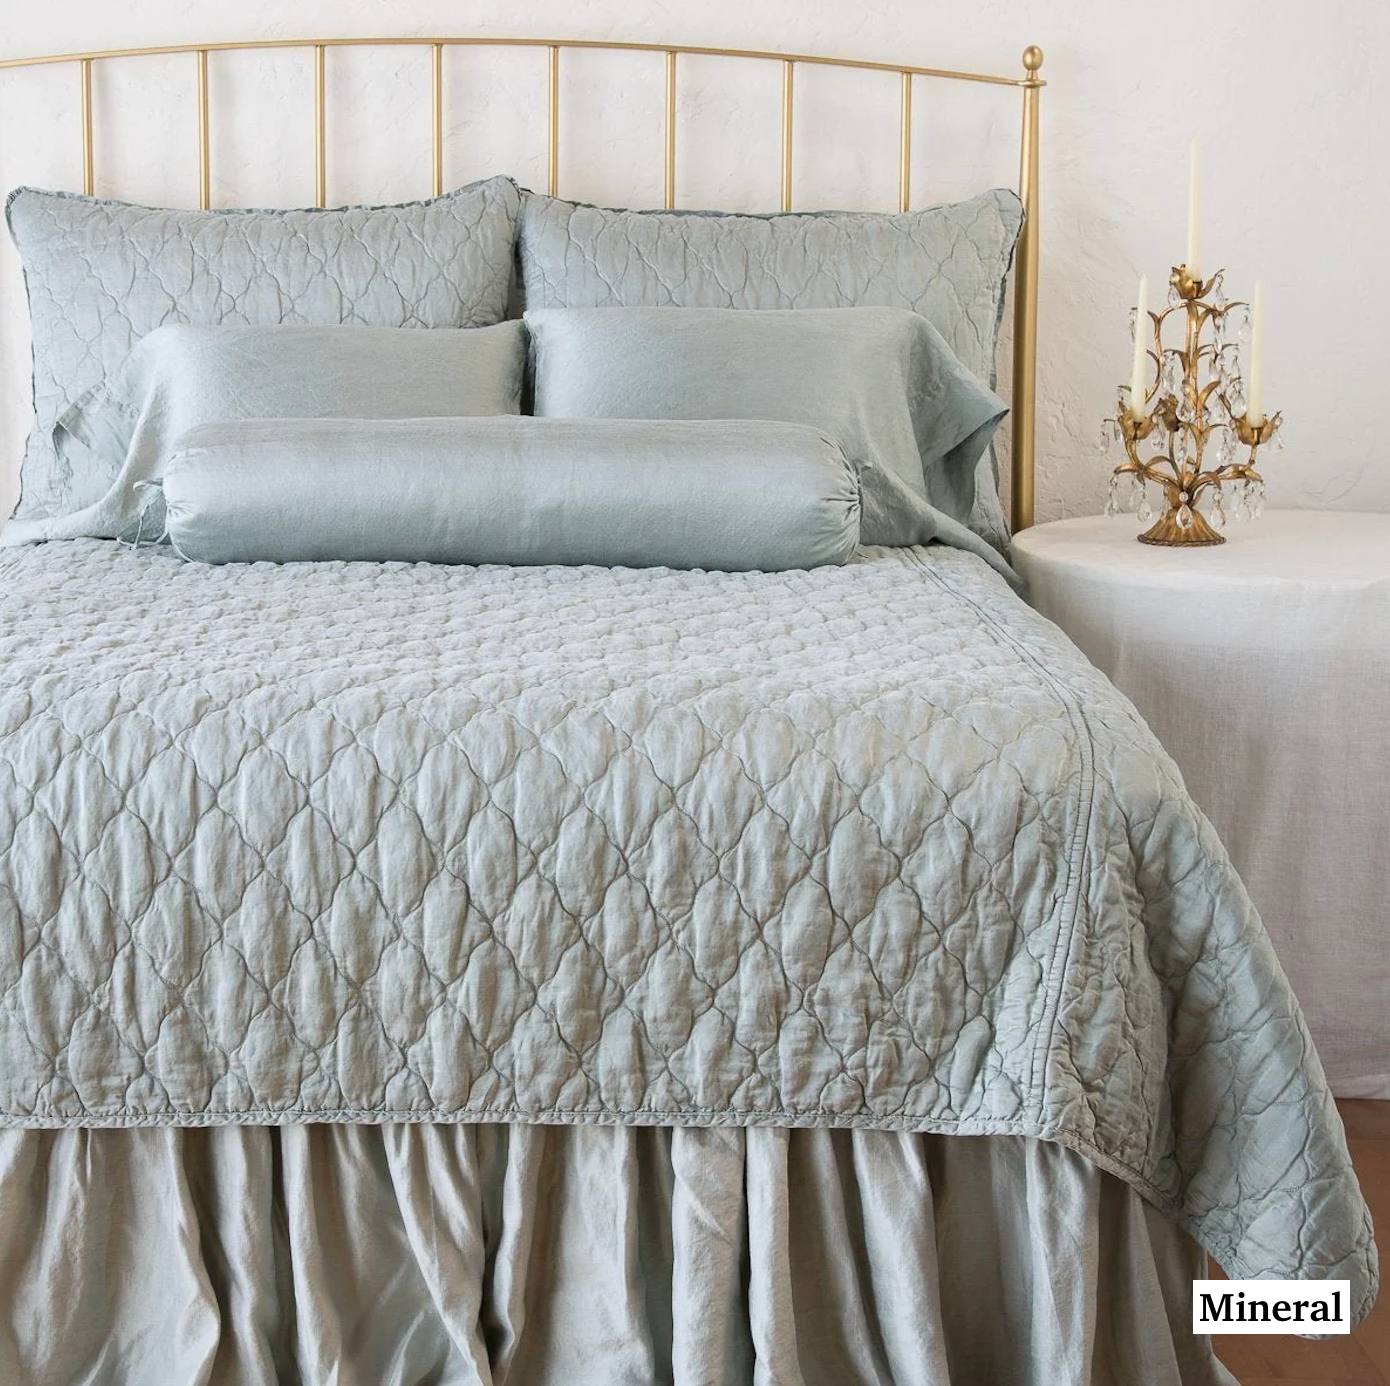 Luna silk & linen coverlet and shams by Bella Notte (**to order)